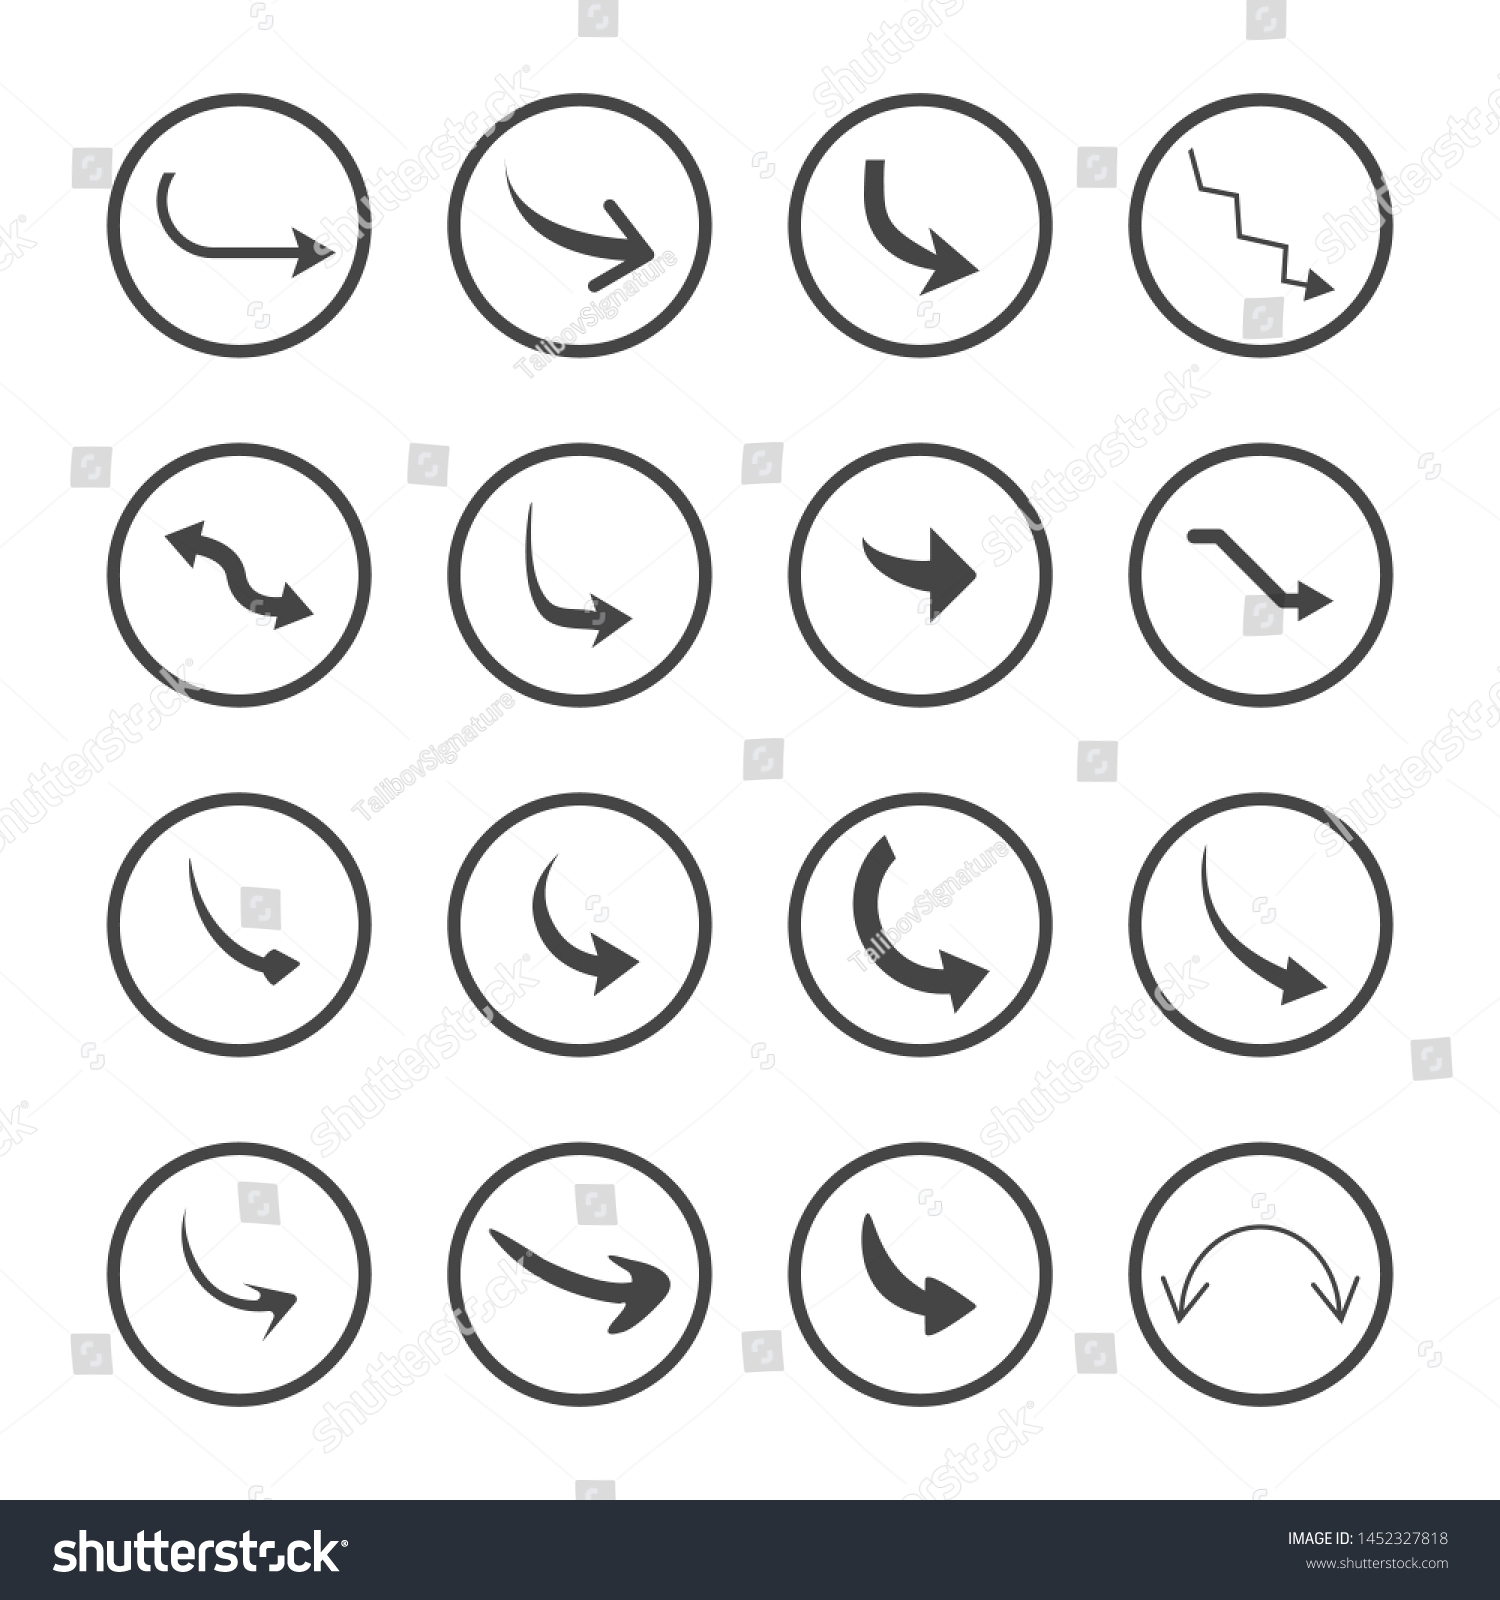 Vector Illustration Curved Arrow Icons 16 Stock Vector Royalty Free 1452327818 Shutterstock 5522